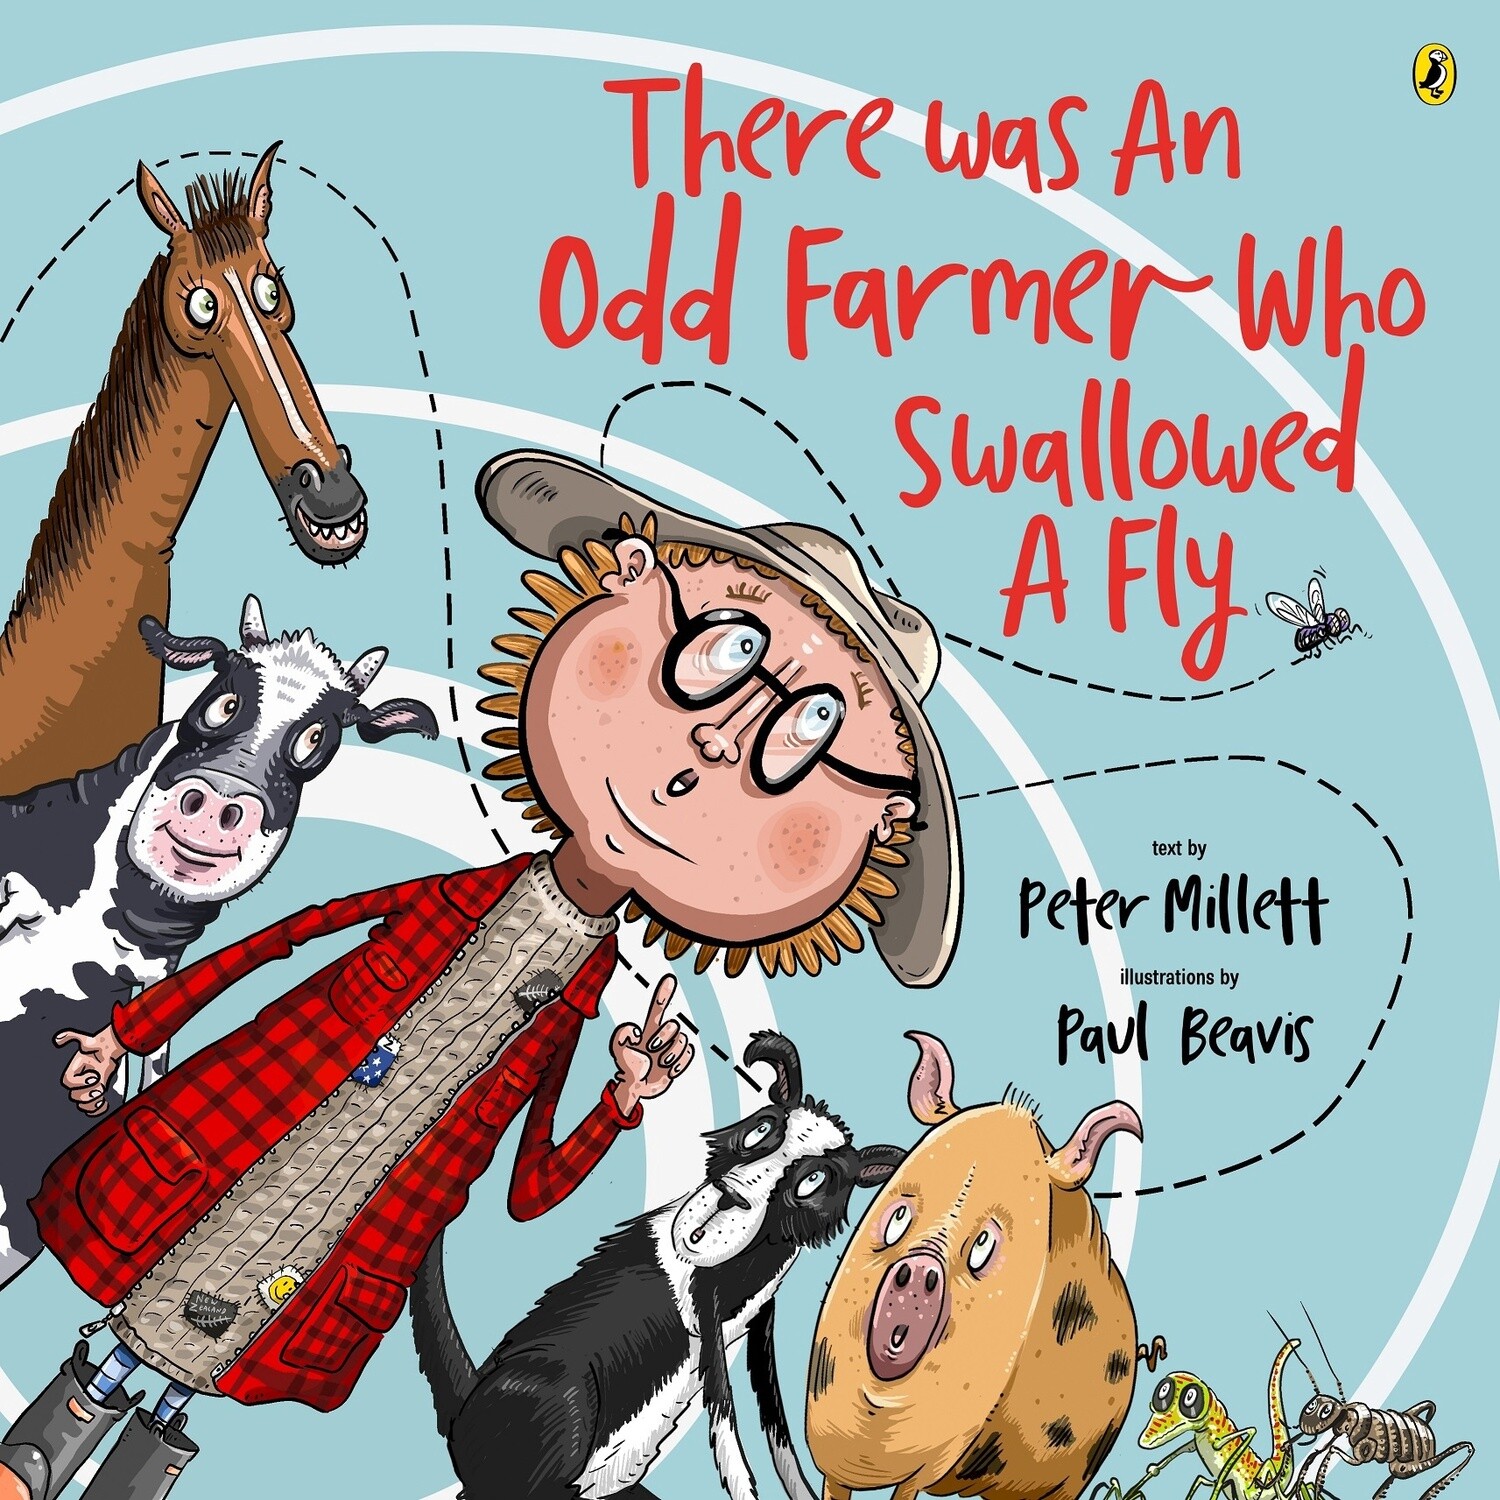 There Was an Odd Farmer Who Swallowed a Fly by Peter Millett